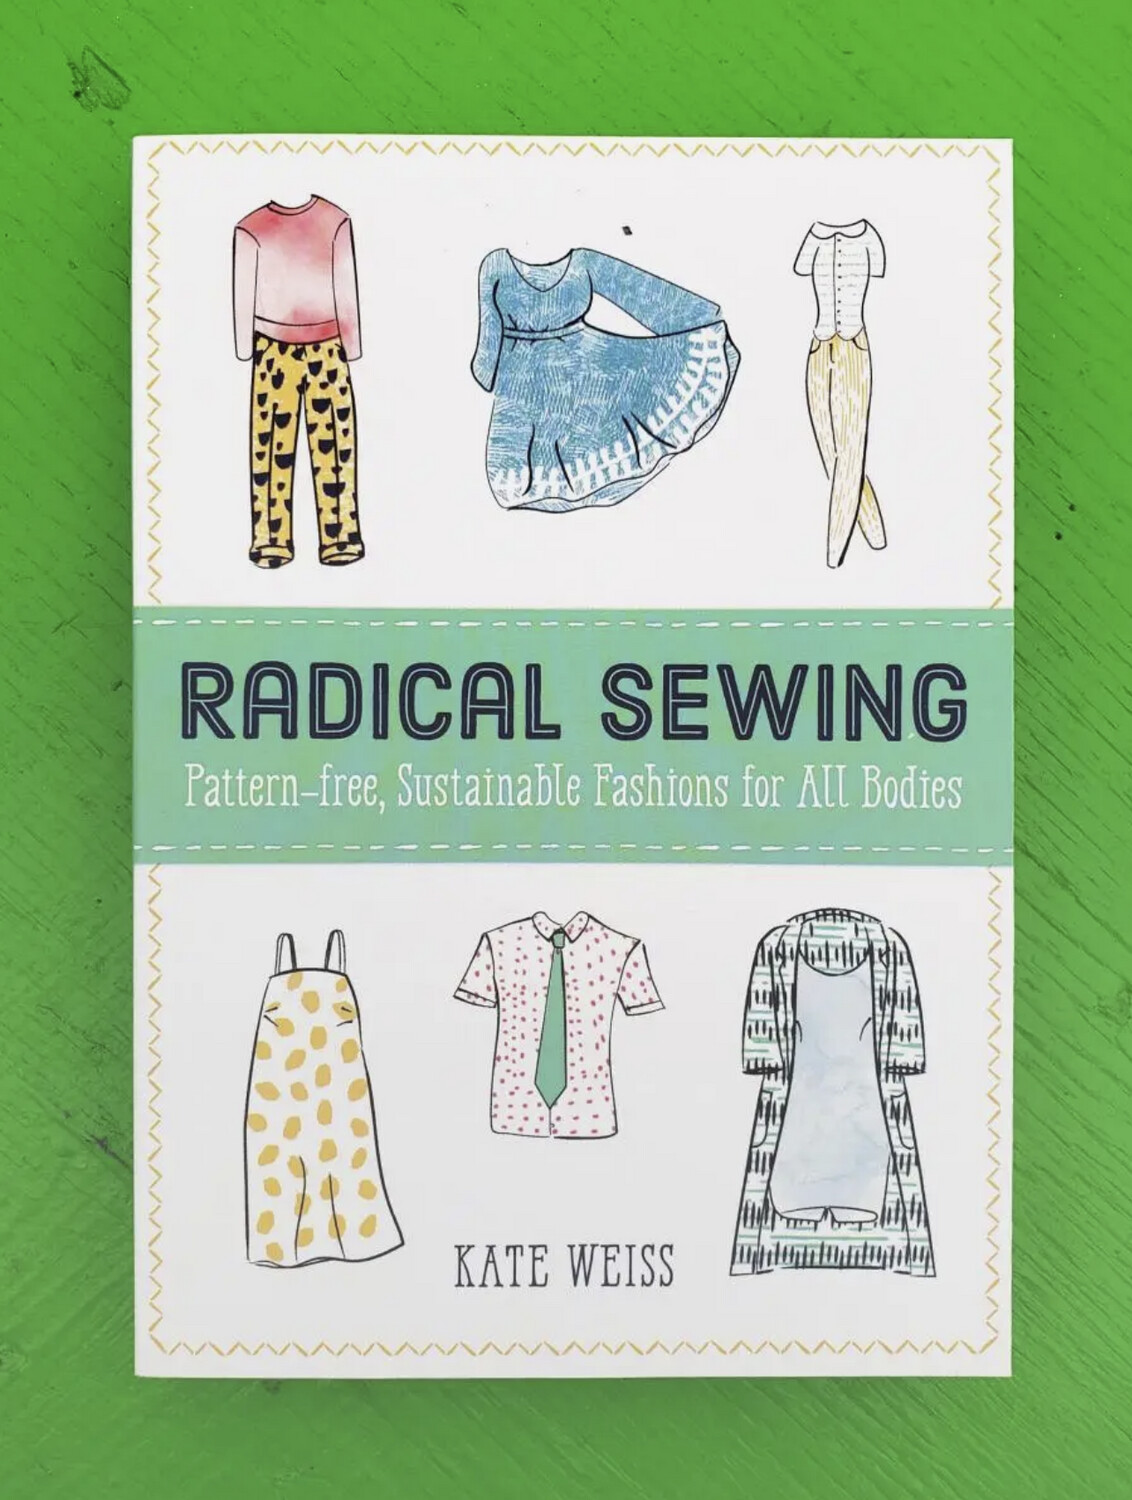 Radical Sewing: Pattern-Free, Sustainable Fashions for All Bodies - Book by Kate Weiss